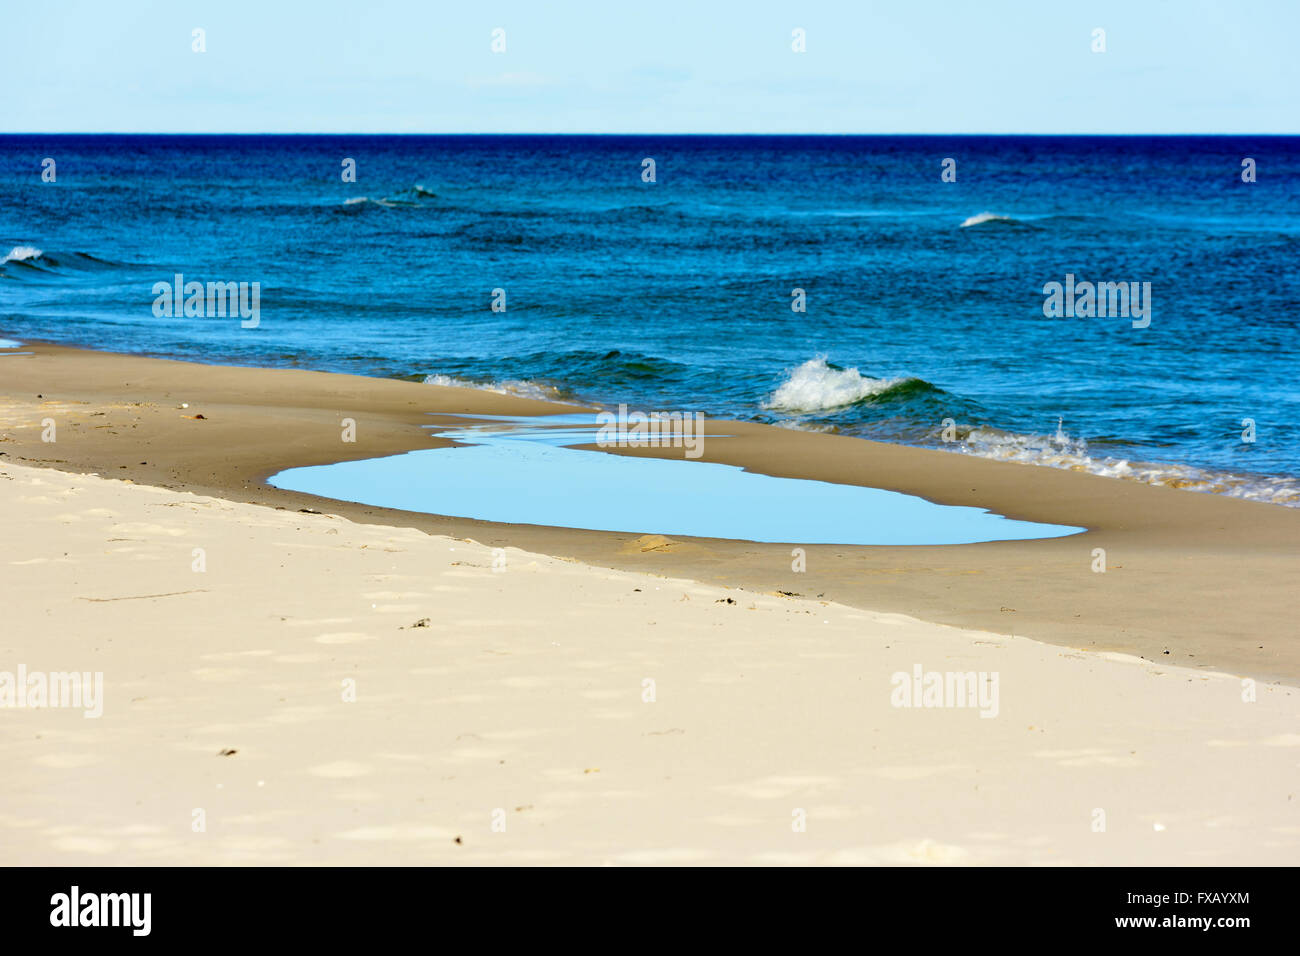 Puddle of shallow seawater on the sandy beach with open sea in the background. Small waves feeding the puddle with new water. Stock Photo